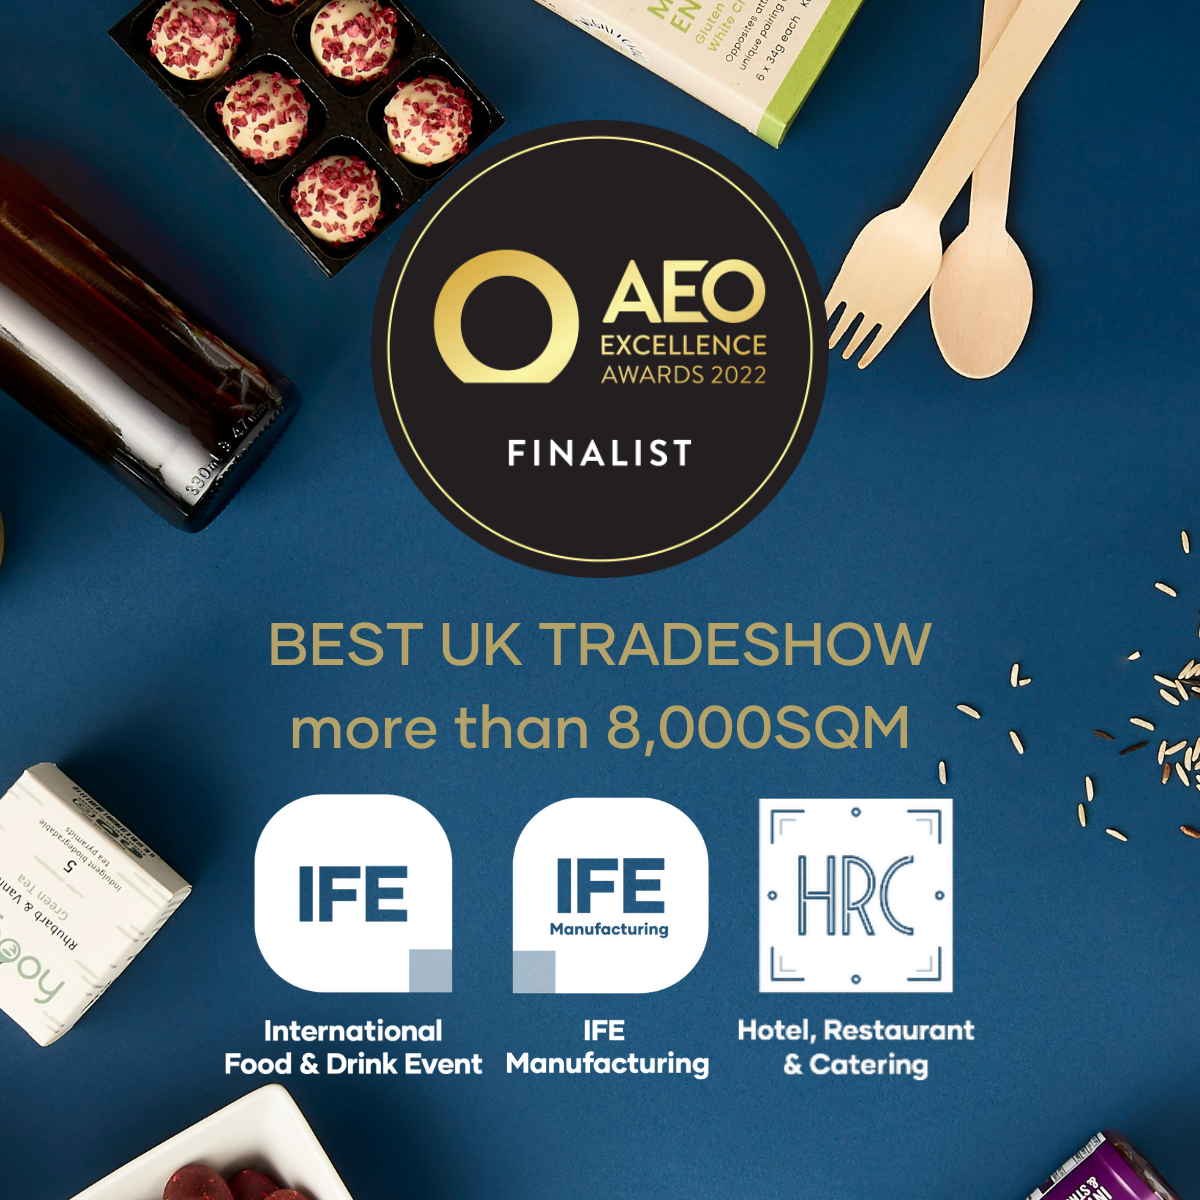 IFE shortlisted for major event industry award